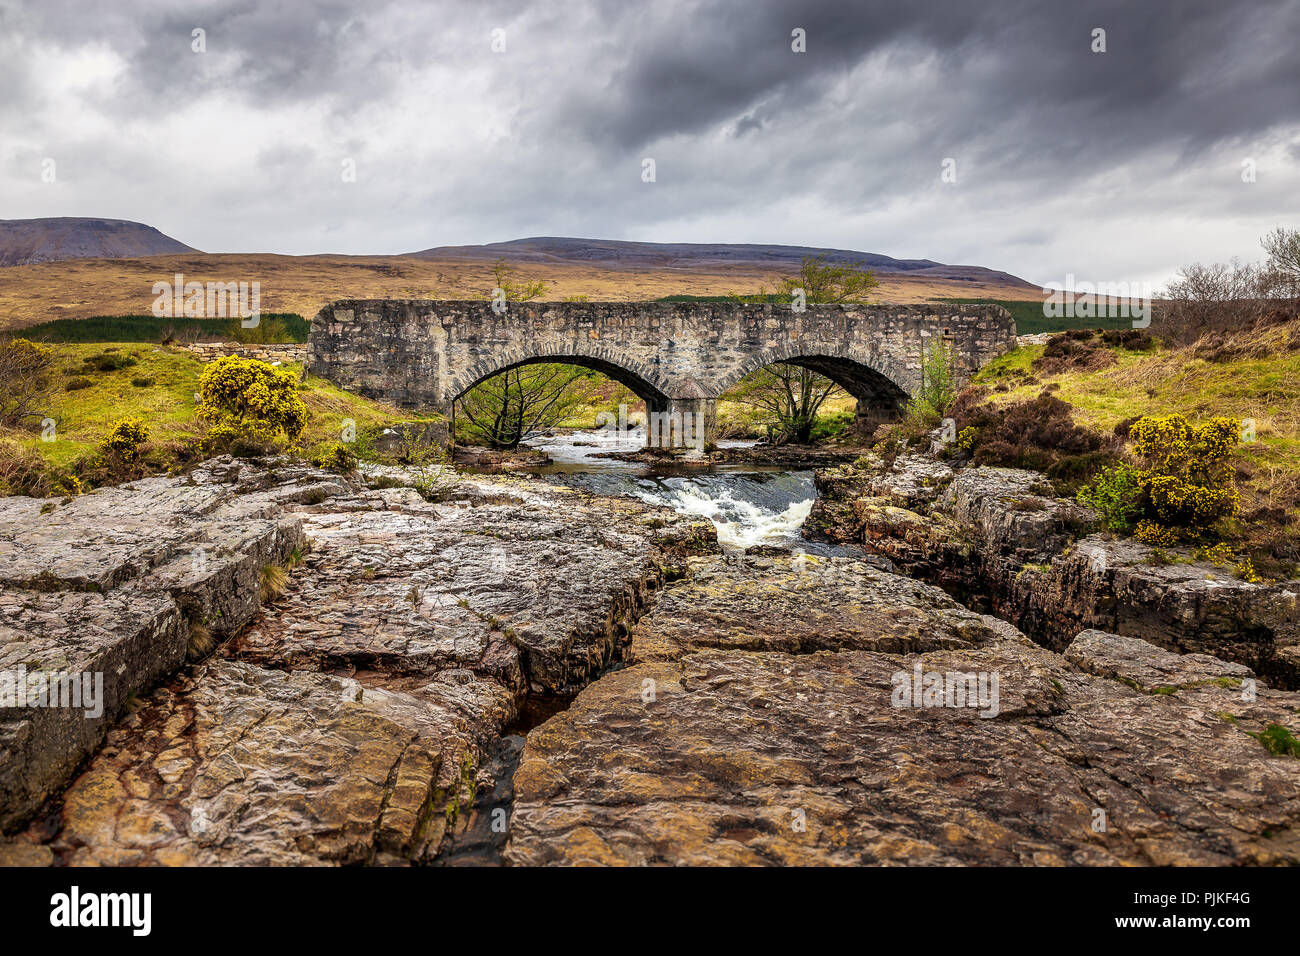 An old stone bridge over a creek in the scottish highlands Stock Photo